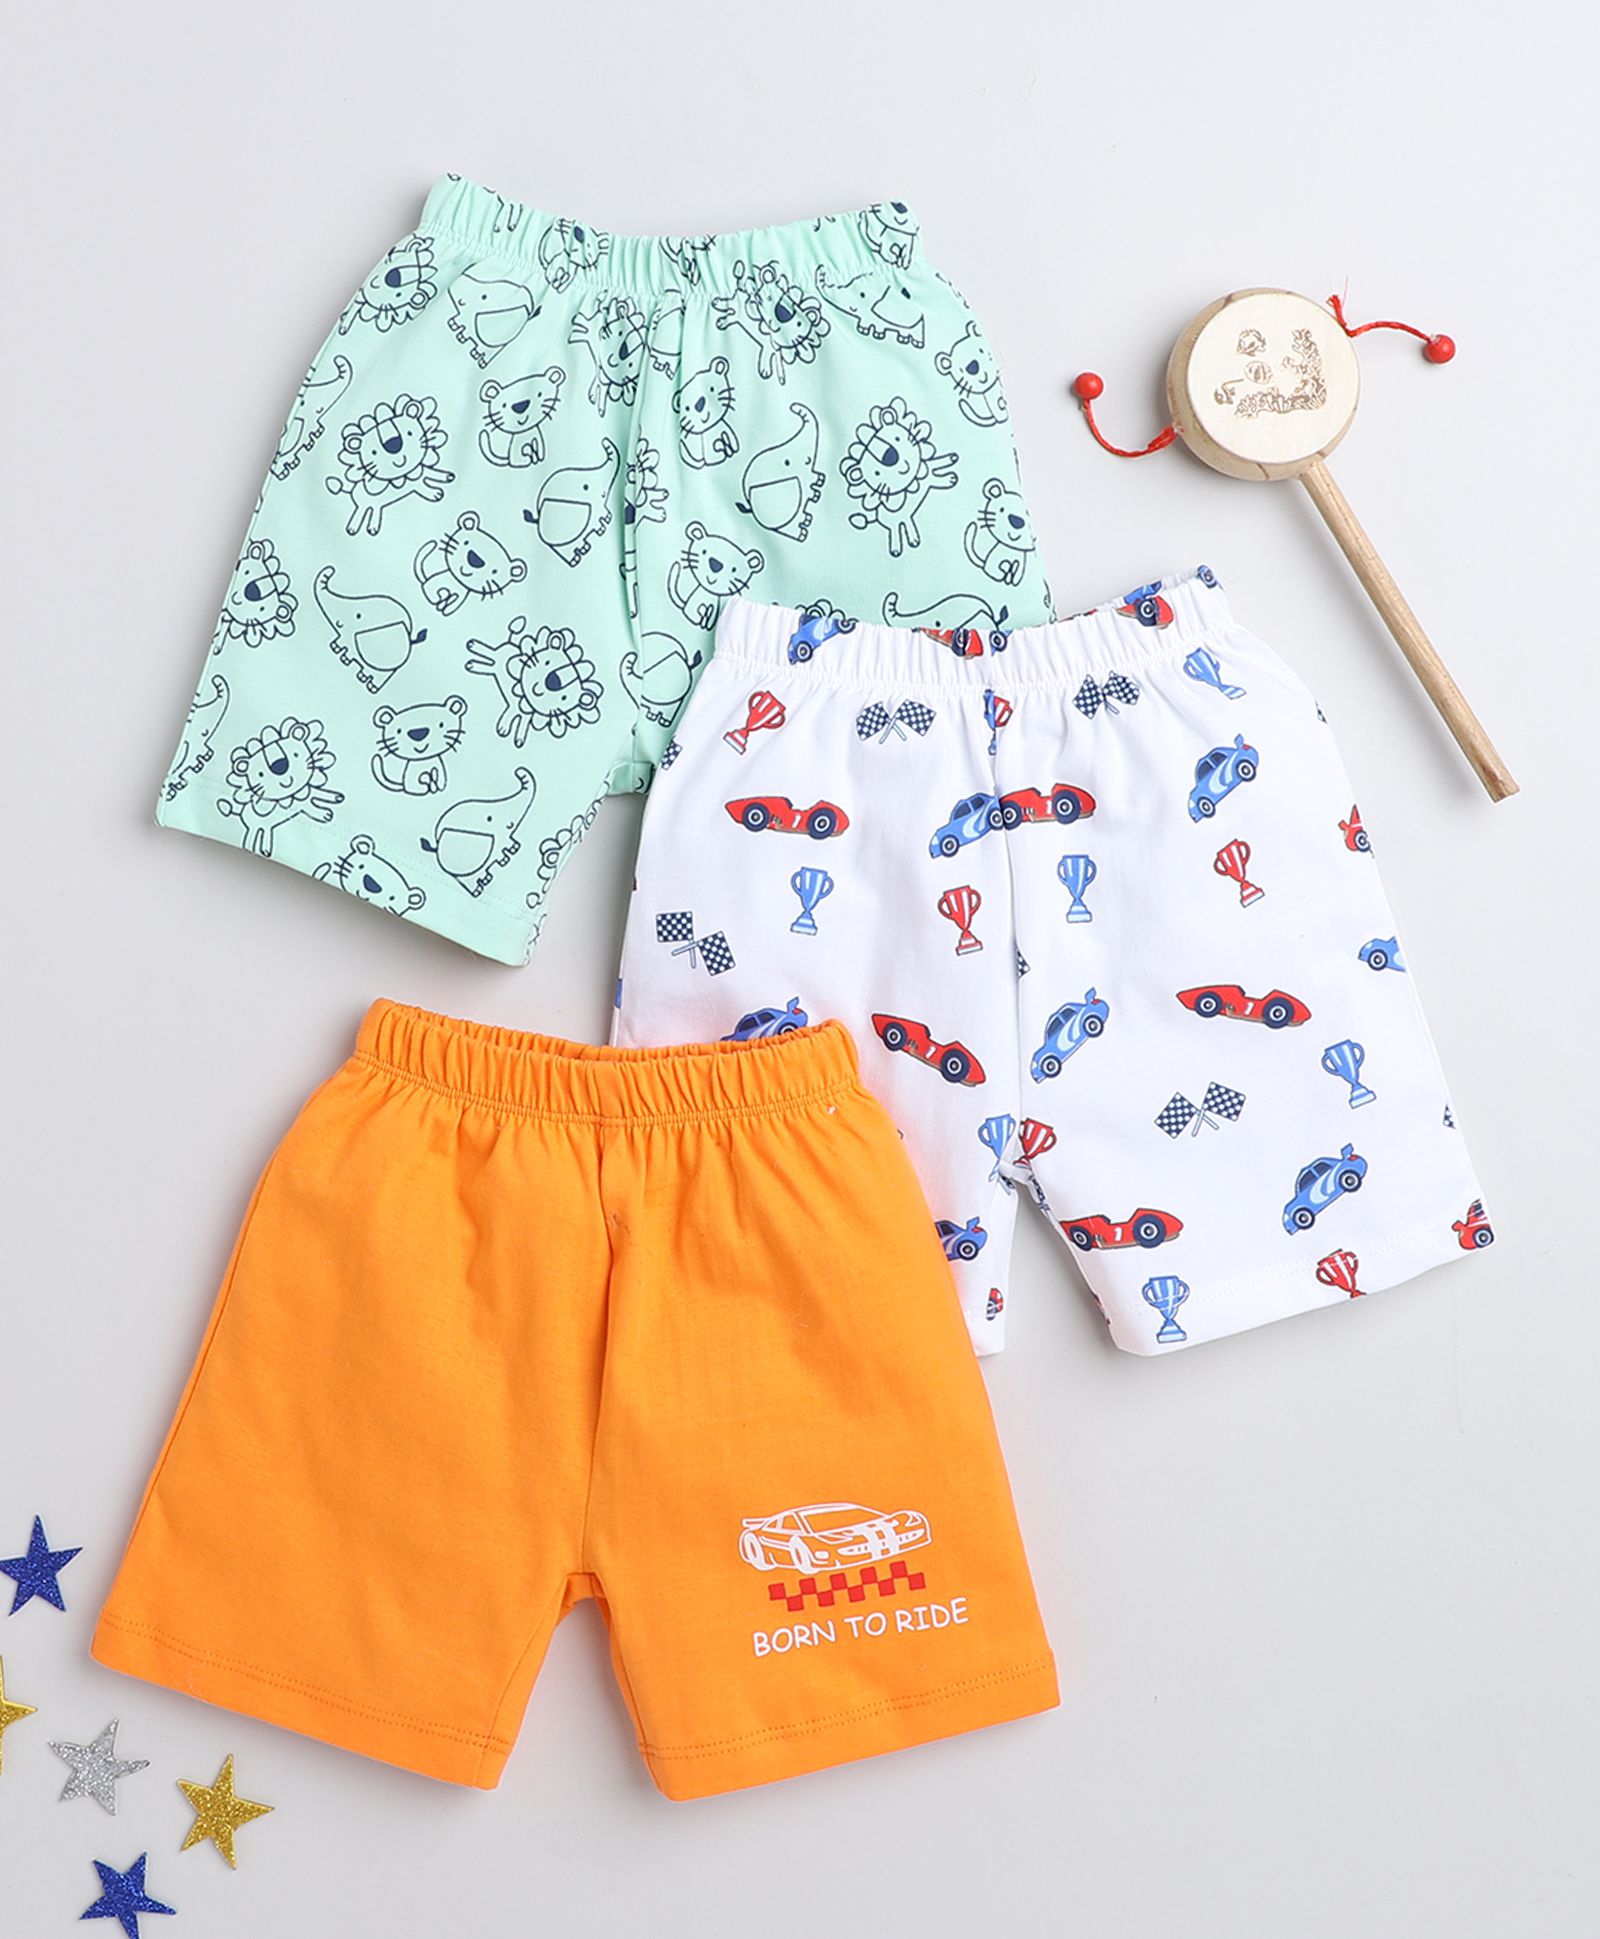     			BUMZEE Green & Orange Boys Shorts Pack Of 3 Age - 12-18 Months